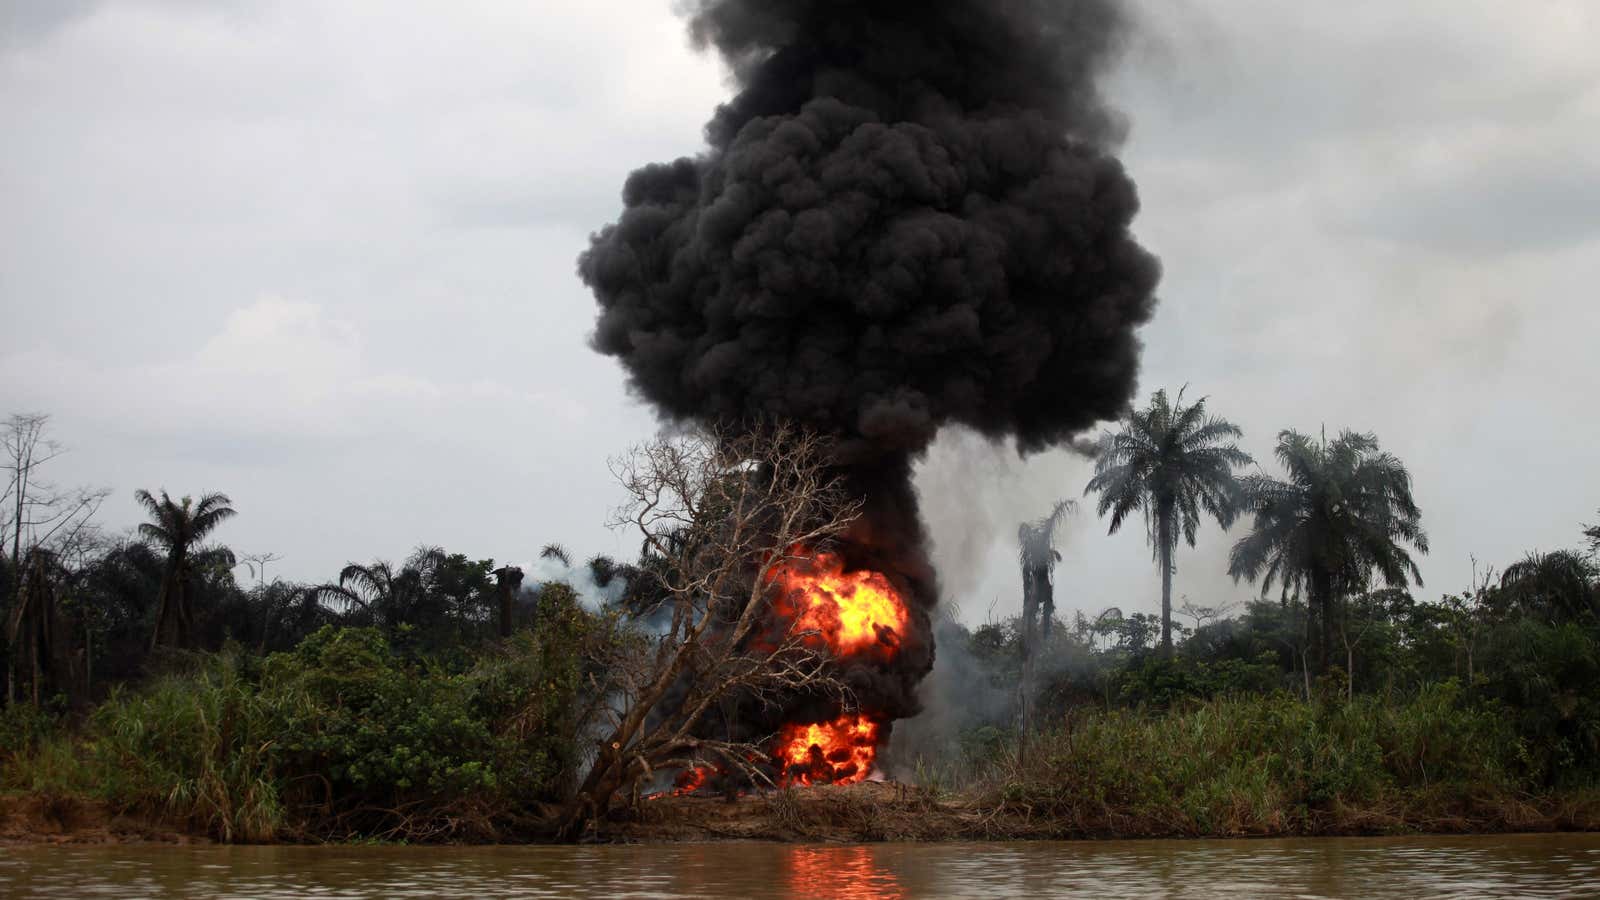 Smoke rises as an illegal oil refinary burns after a military chase in NIgeria’s delta region.